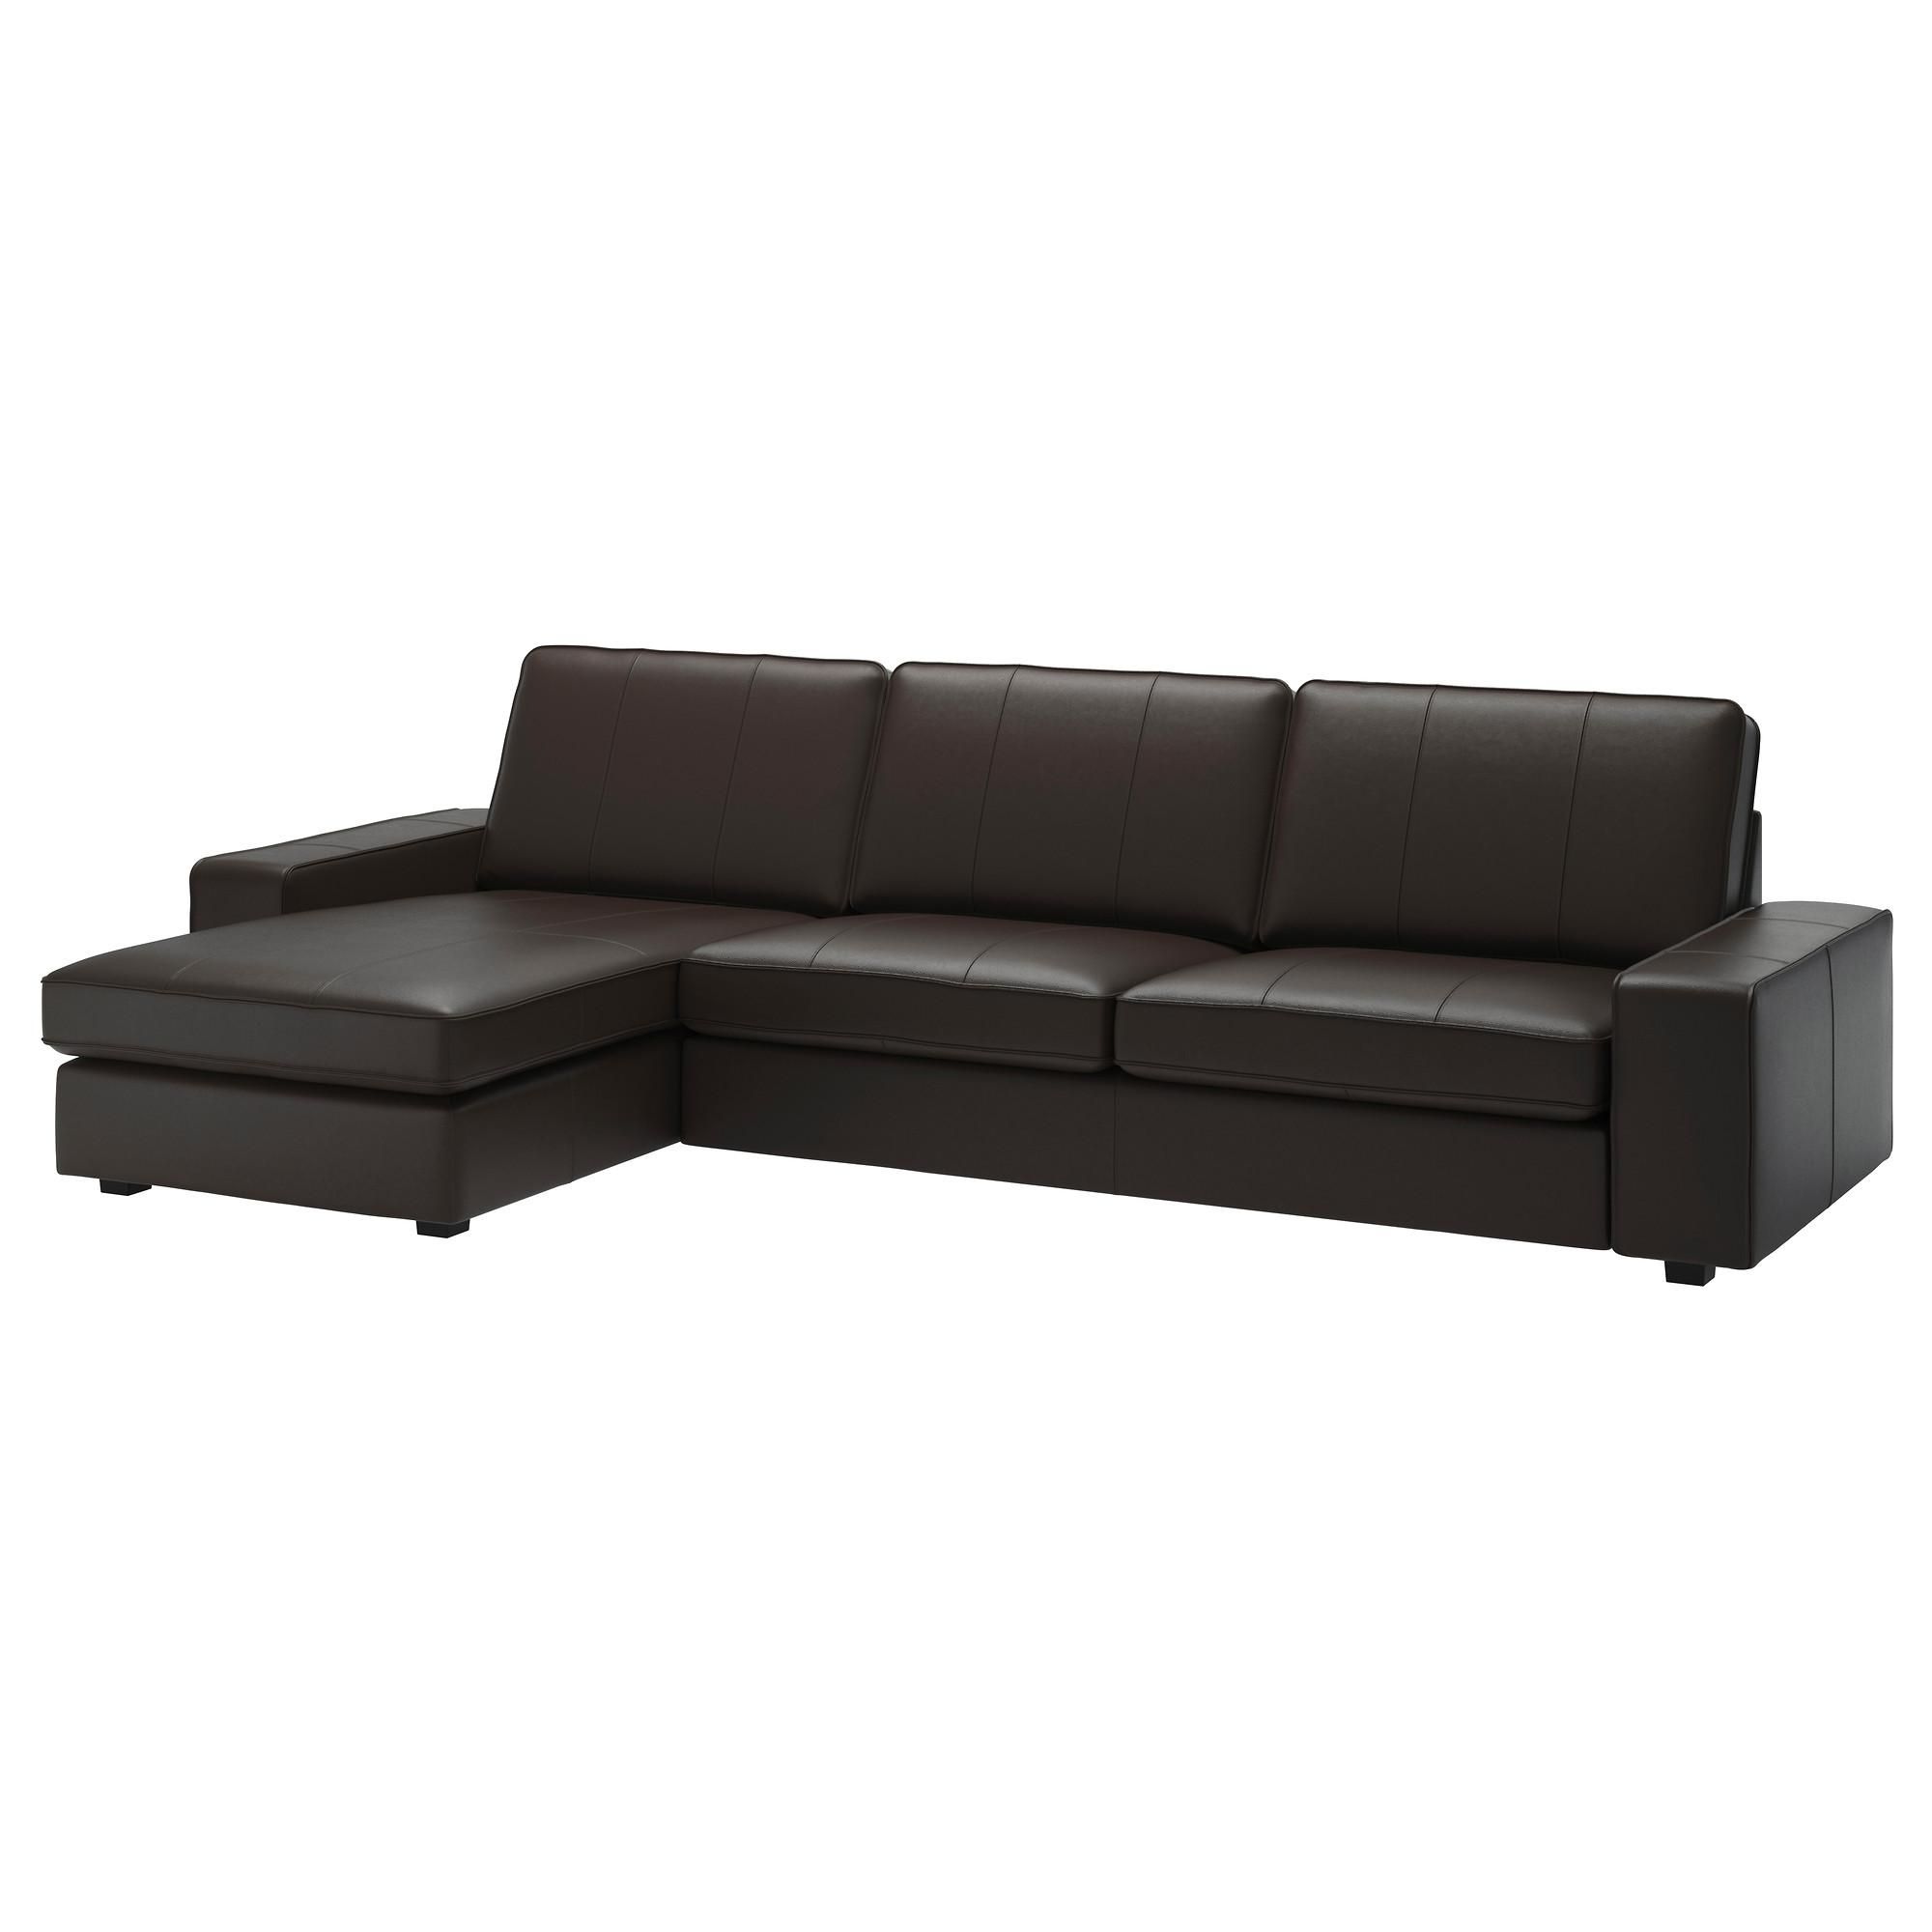 Leather & Faux Leather Couches, Chairs & Ottomans – Ikea Regarding 4 Seat Leather Sofas (View 12 of 20)